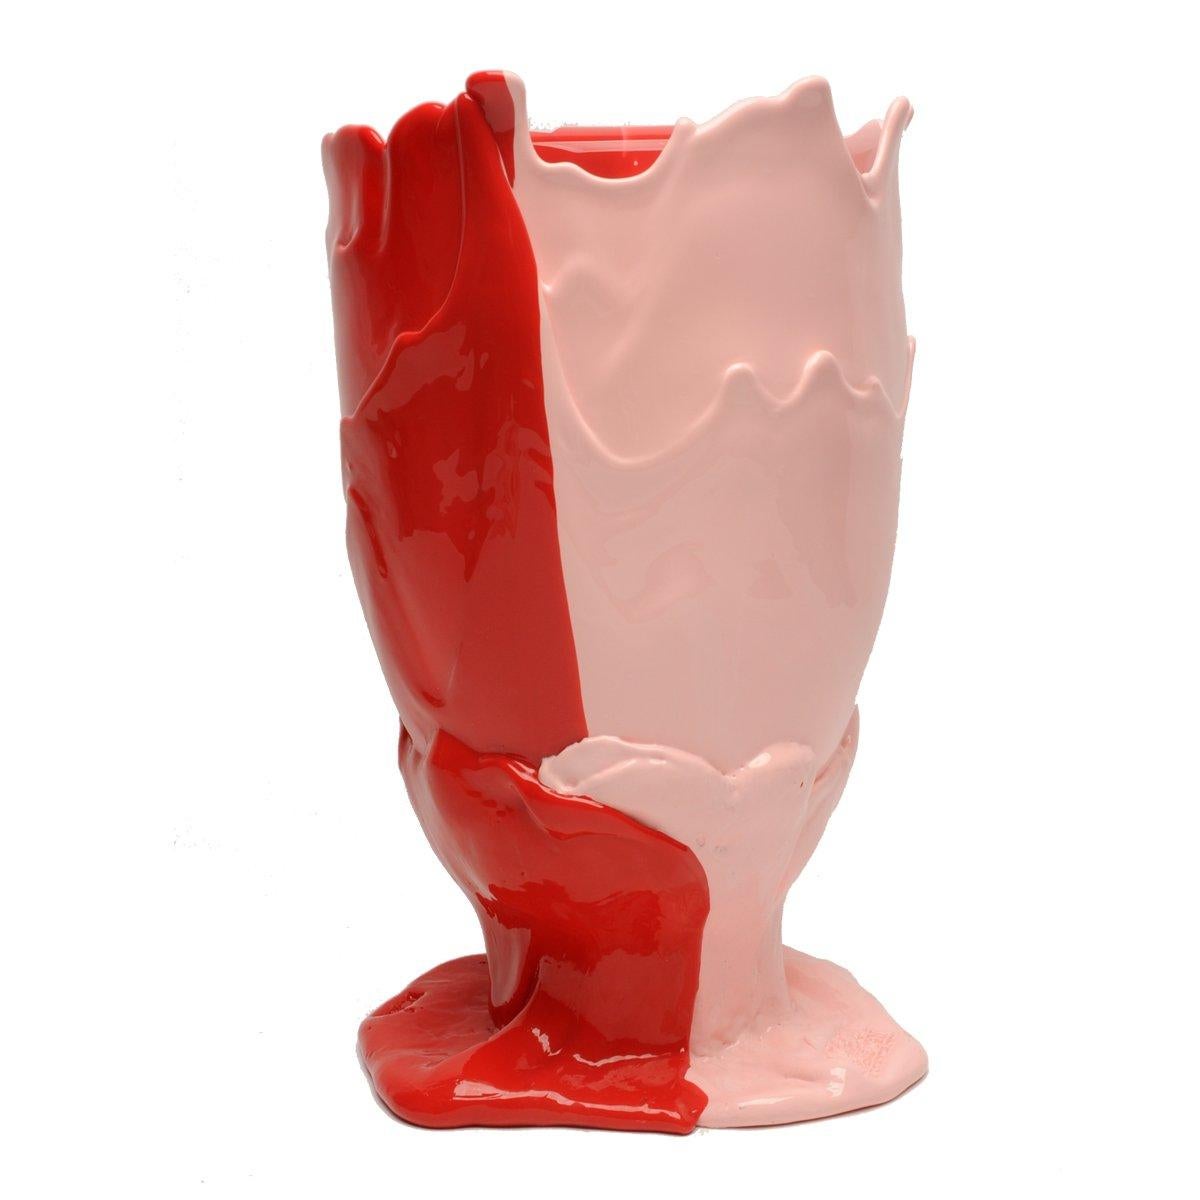 Twin-C vase, matt pink and red.

Vase in soft resin designed by Gaetano Pesce in 1995 for Fish Design collection.

Measures: M - ø 16cm x H 26cm

Other sizes available.

Colours: Matt pink and red.

Vase in soft resin designed by Gaetano